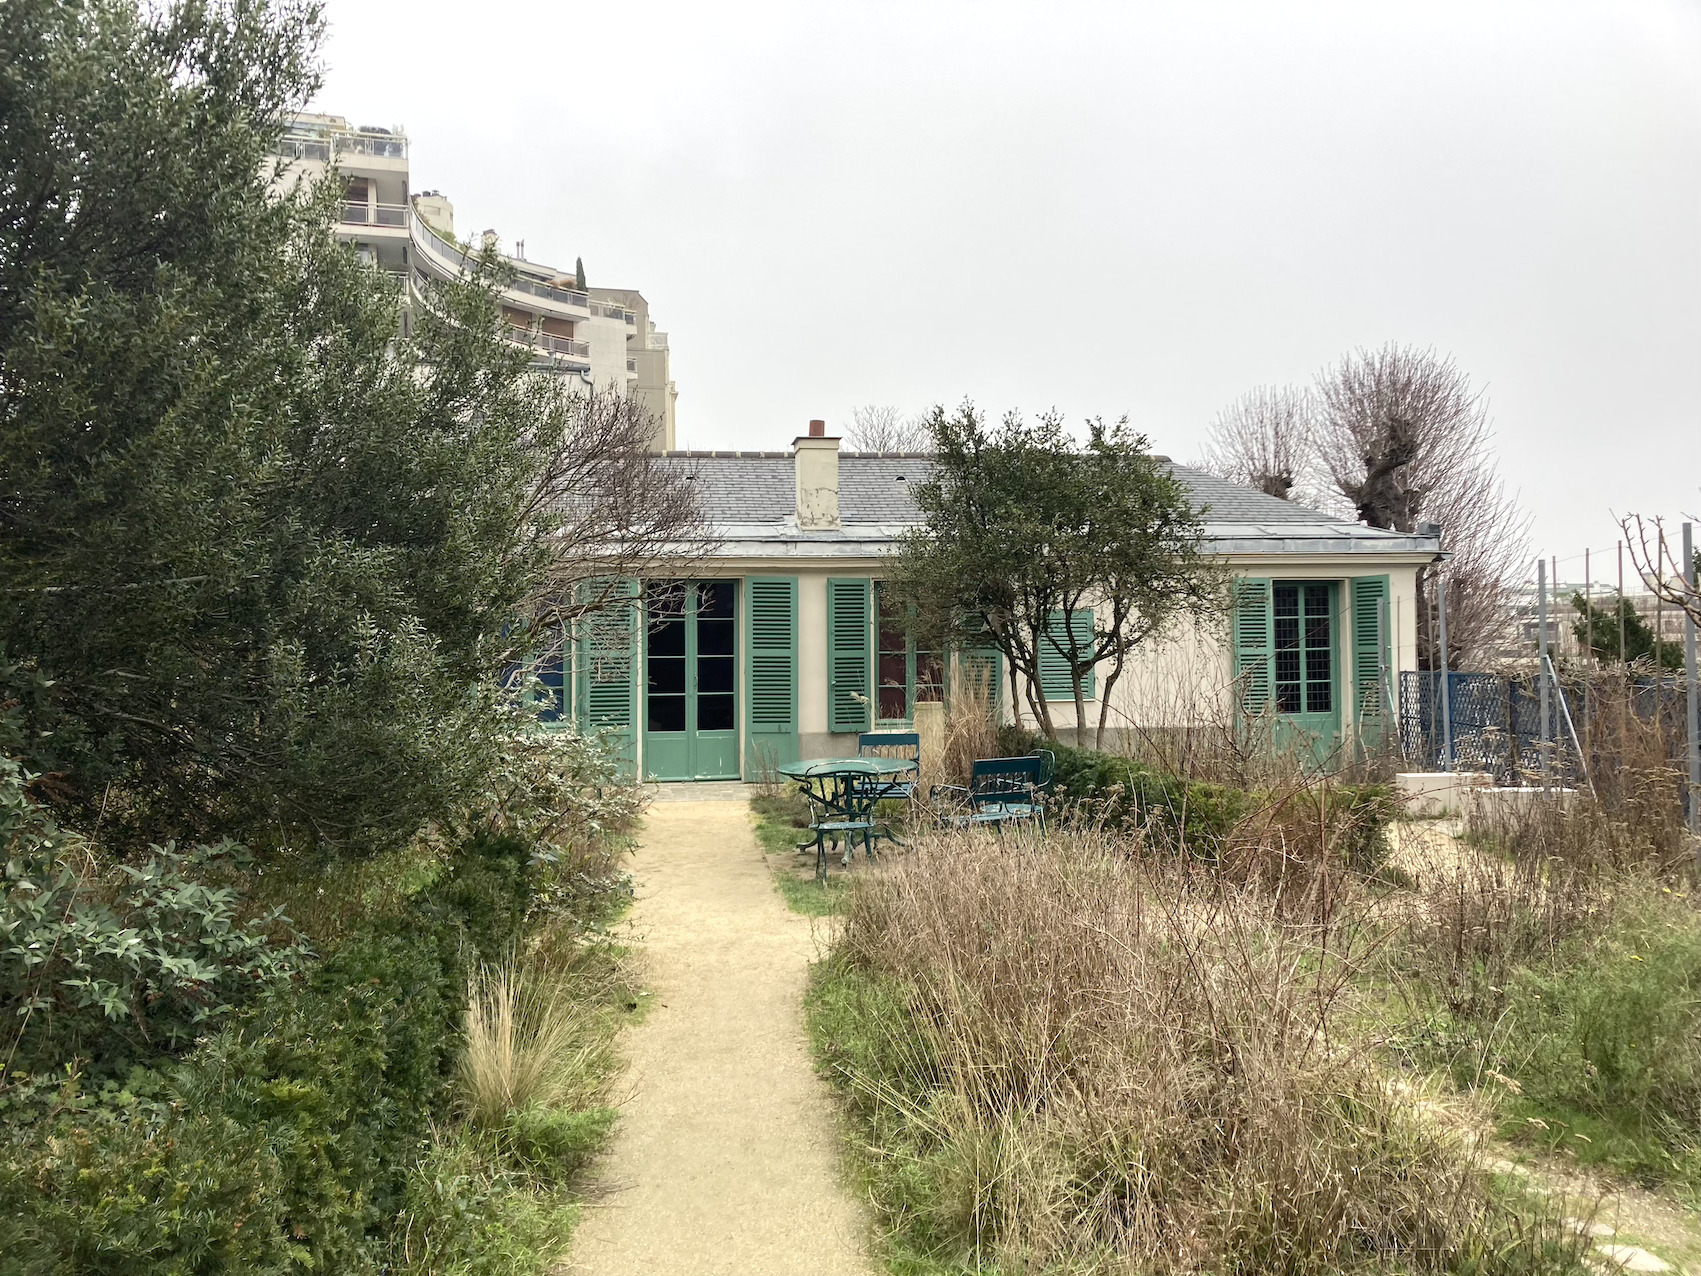 Balzac's house and garden in Paris that are now a museum.